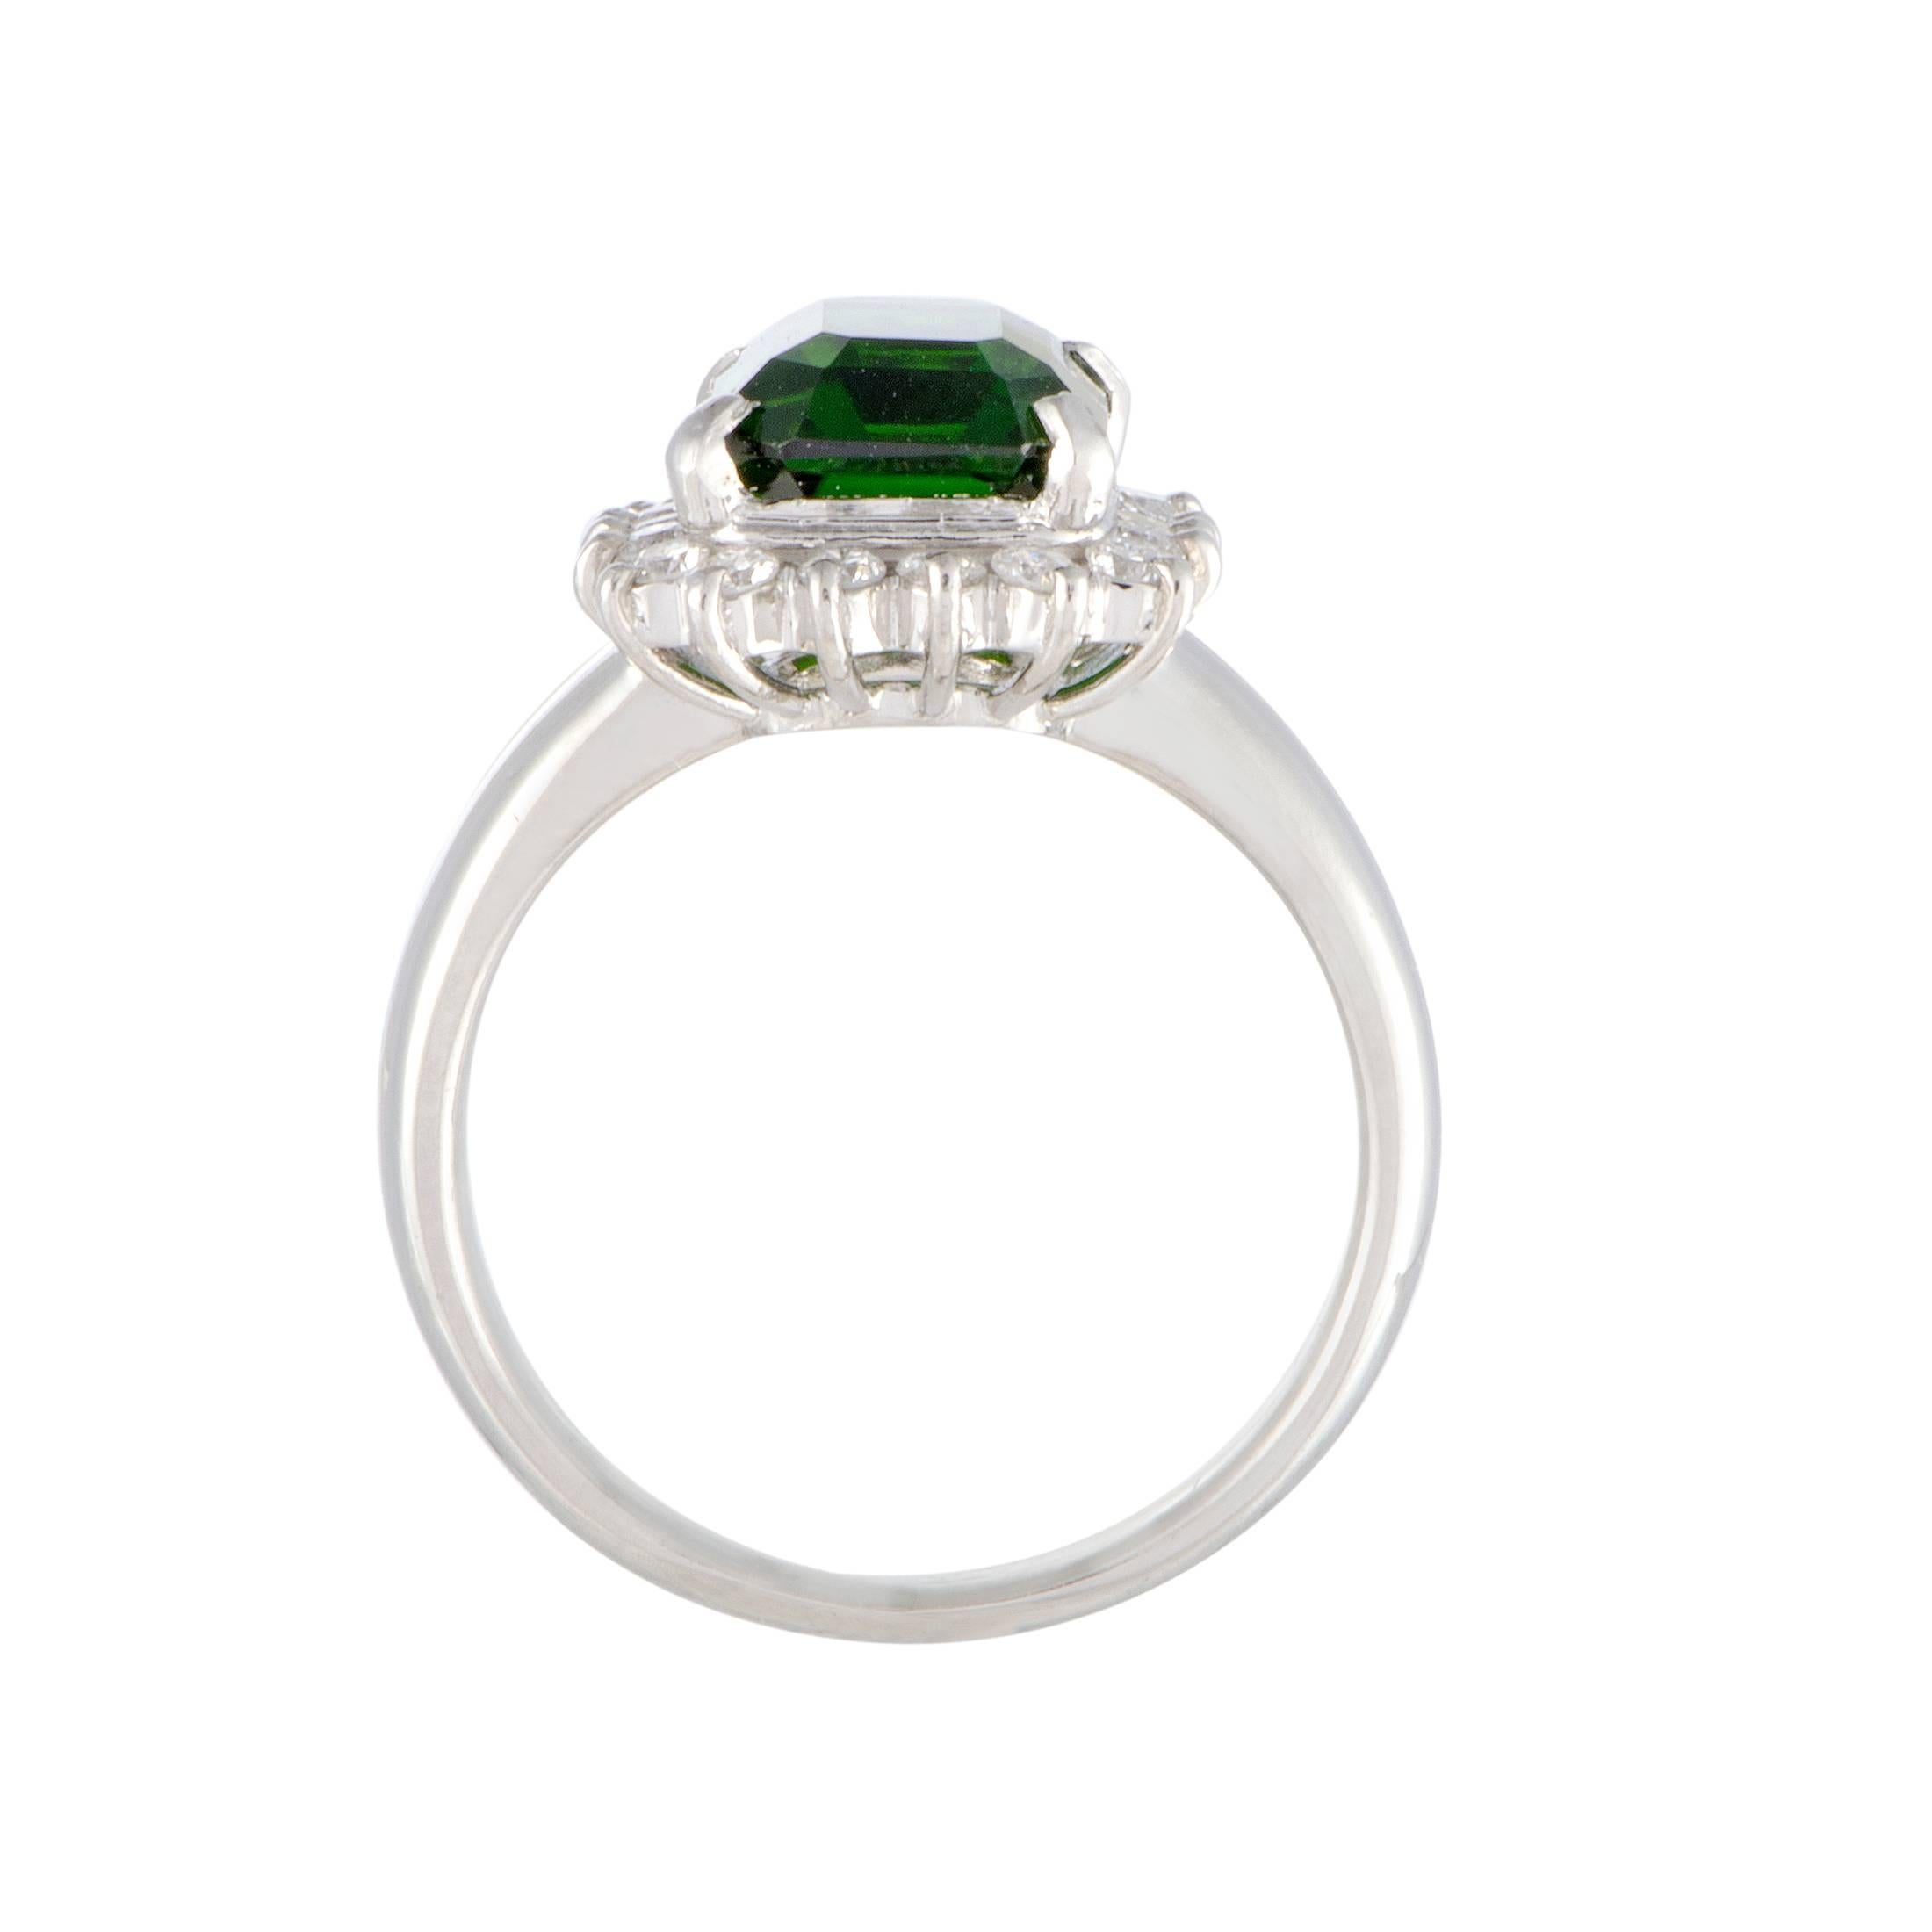 Designed in a splendidly classic style and luxuriously decorated, this ring boasts a compellingly refined appeal. Made of platinum, the ring features an eye-catching green tourmaline that weighs 2.75 carats, surrounded by scintillating diamonds that